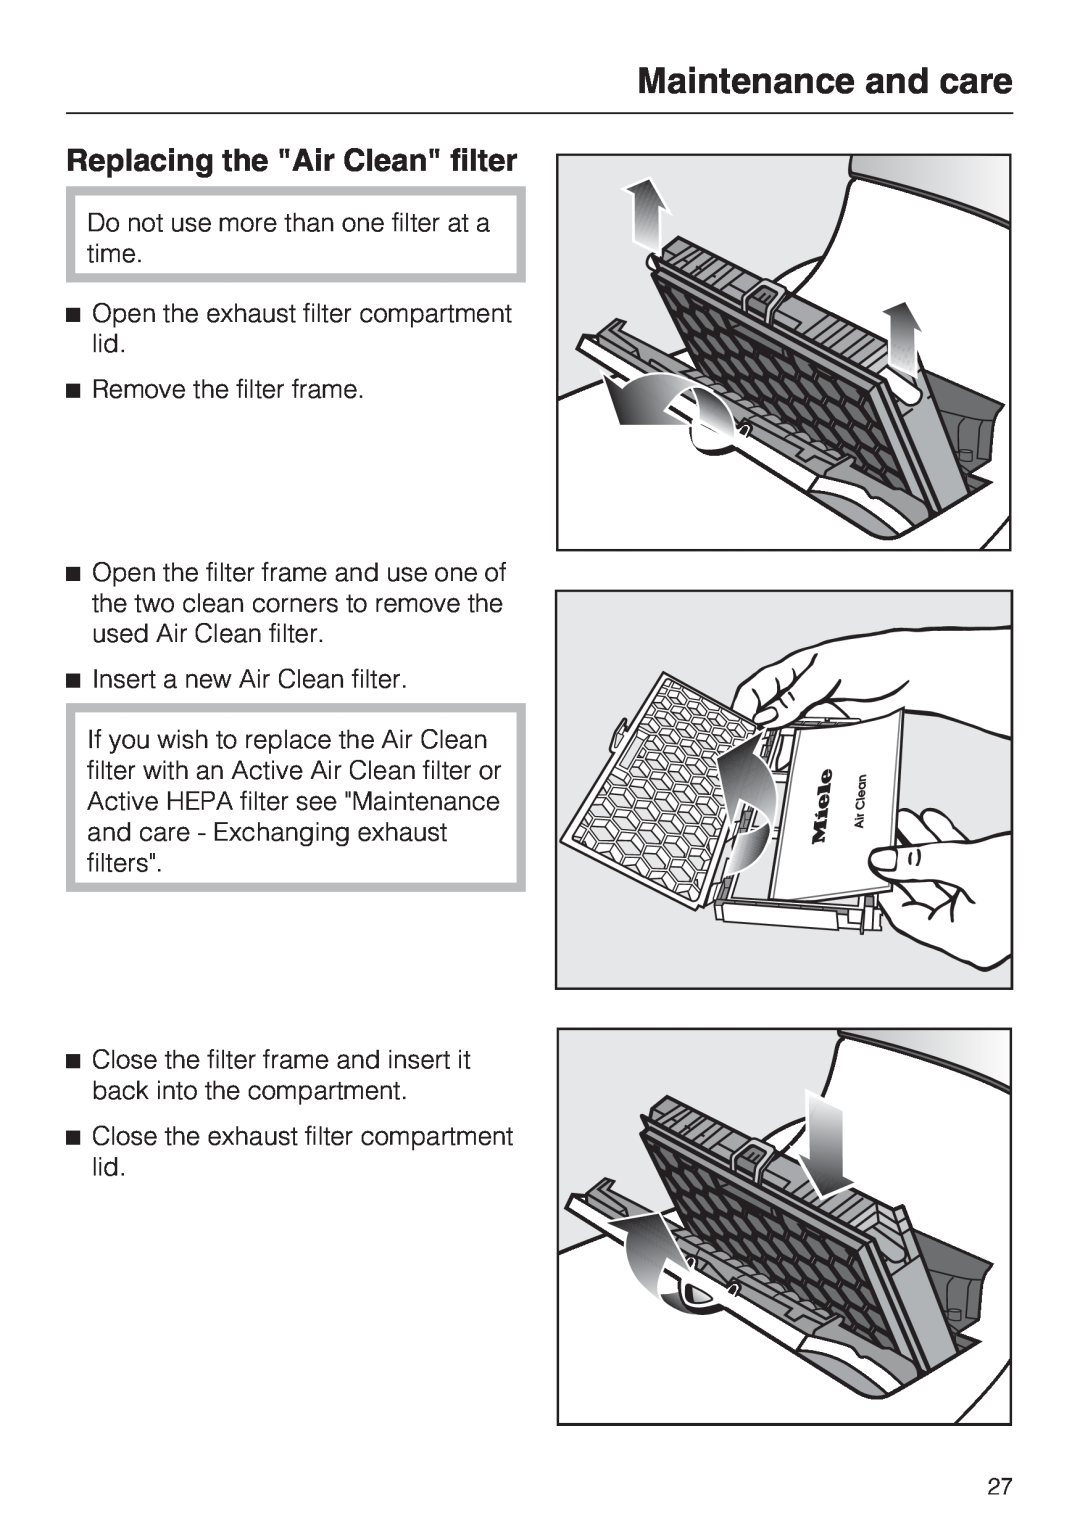 Miele S 7000 operating instructions Replacing the Air Clean filter, Maintenance and care 